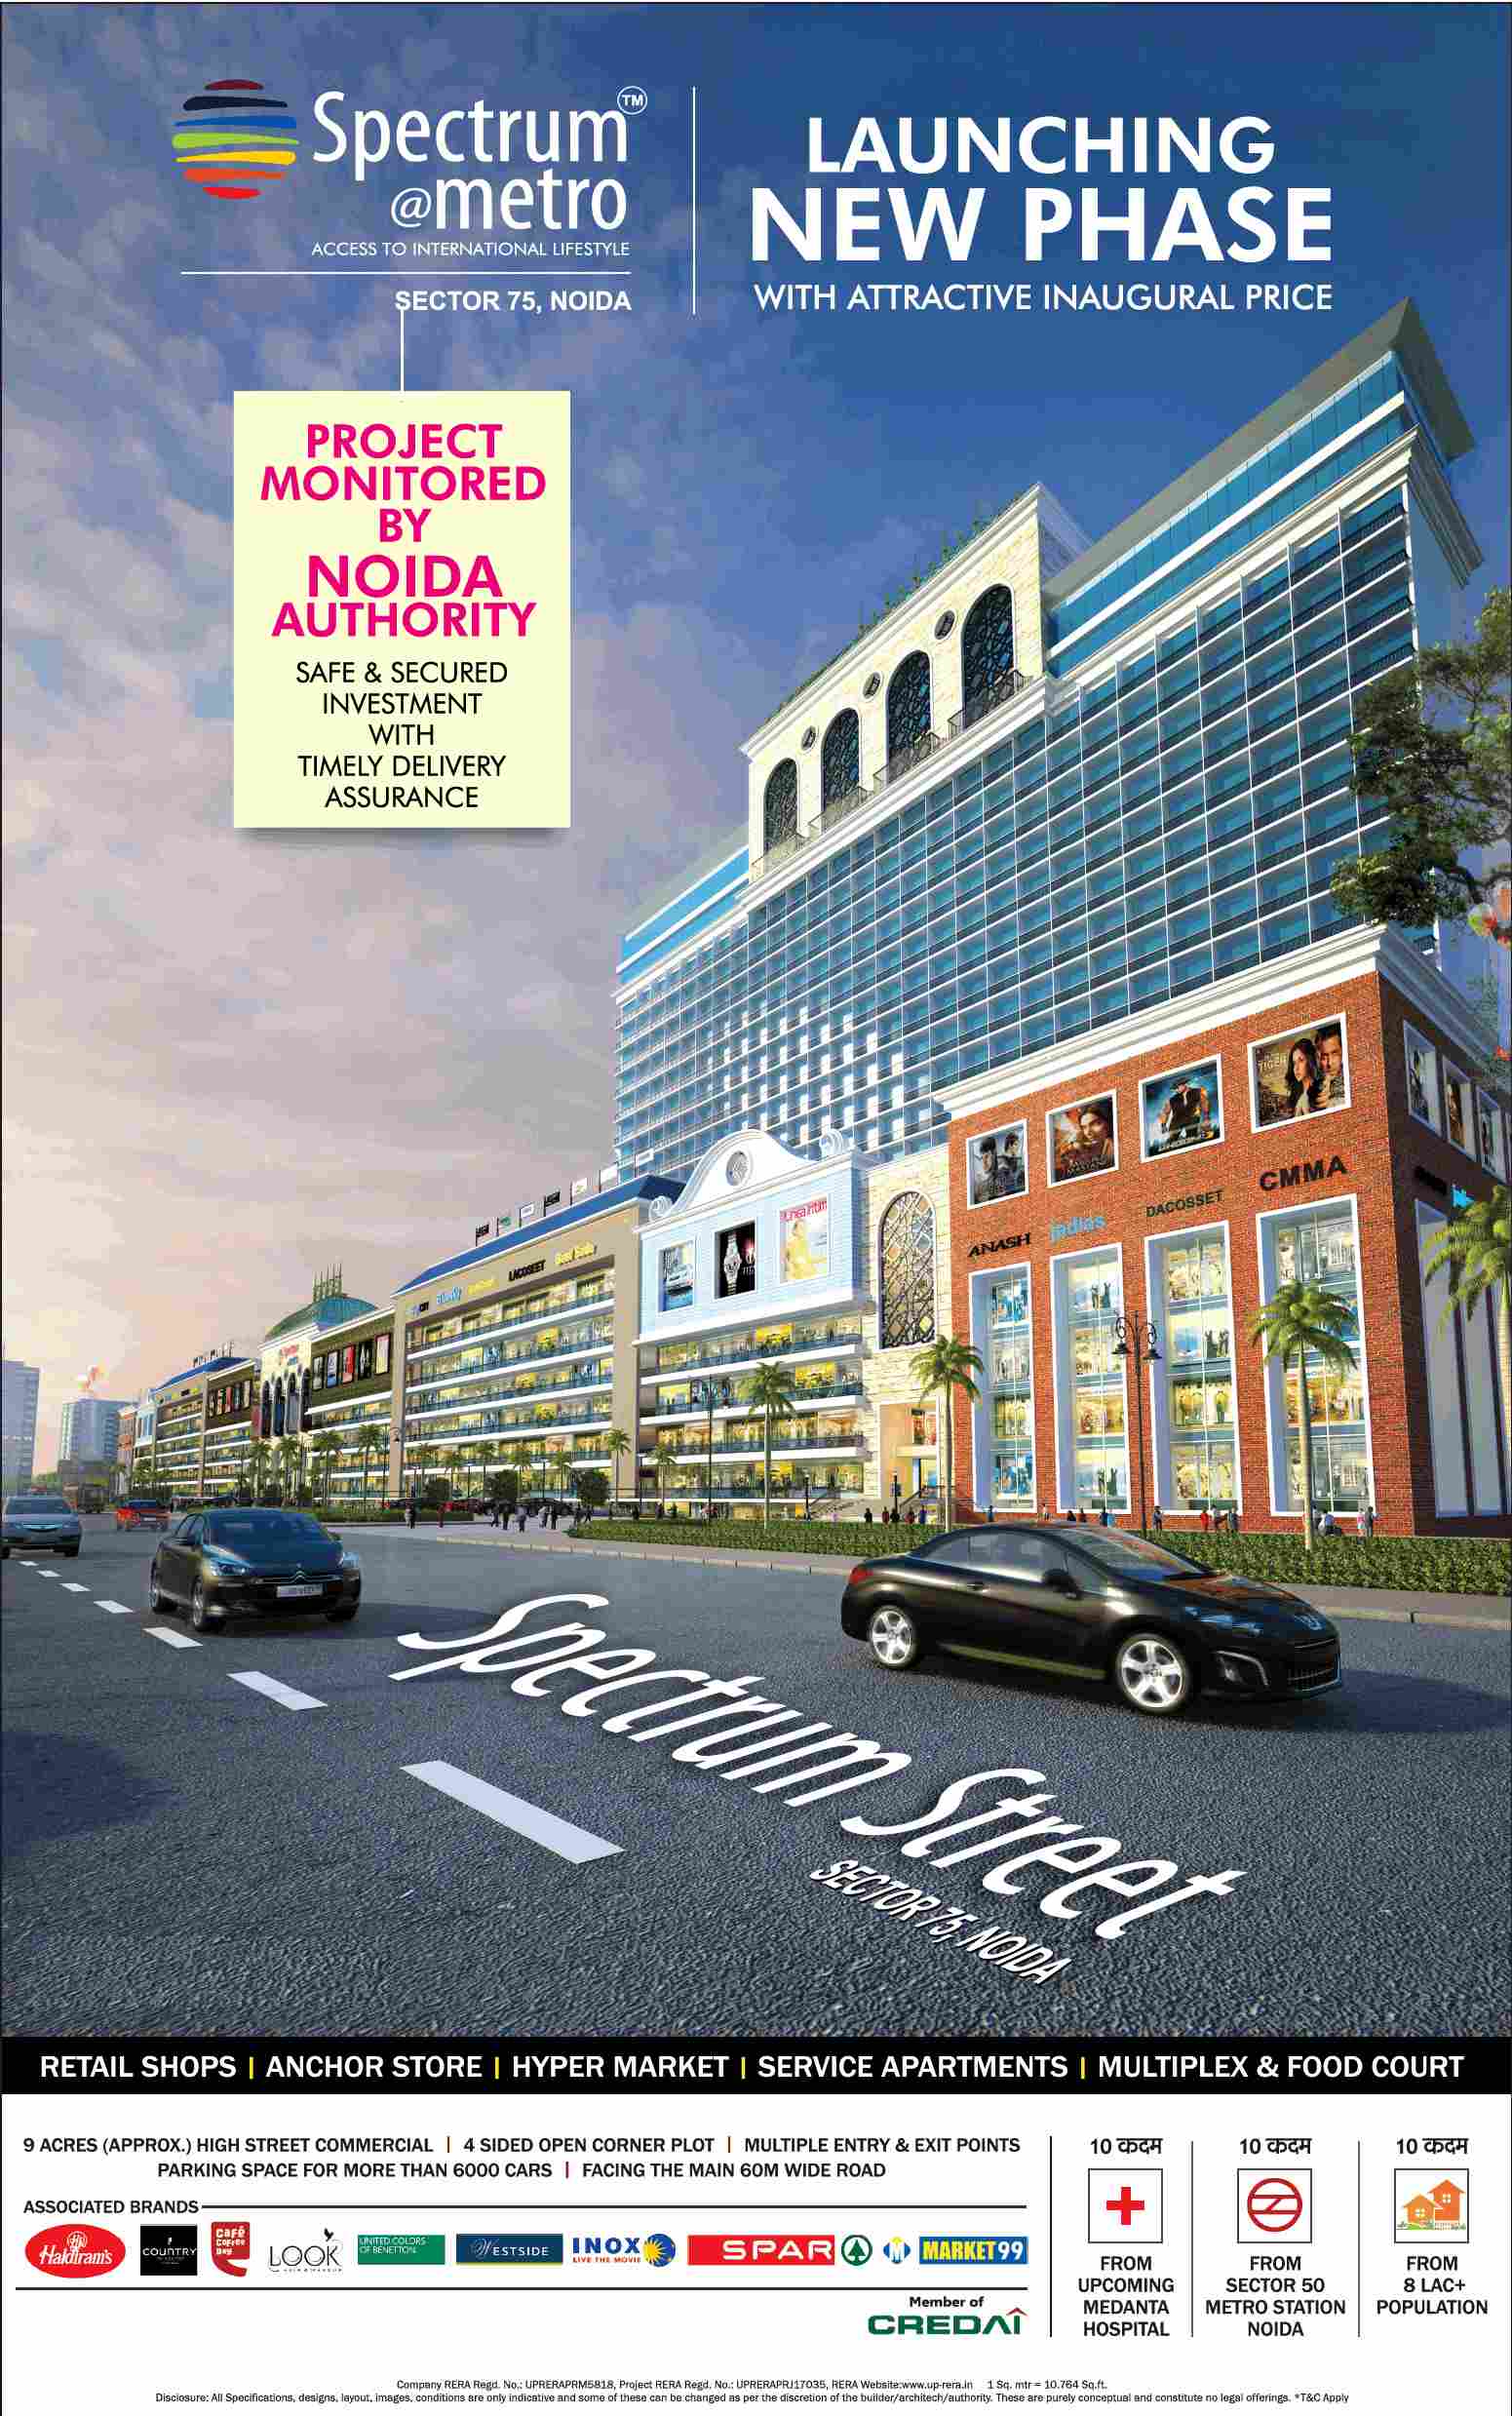 Launching new phase with attractive inaugural price at Blue Spectrum Metro in Noida